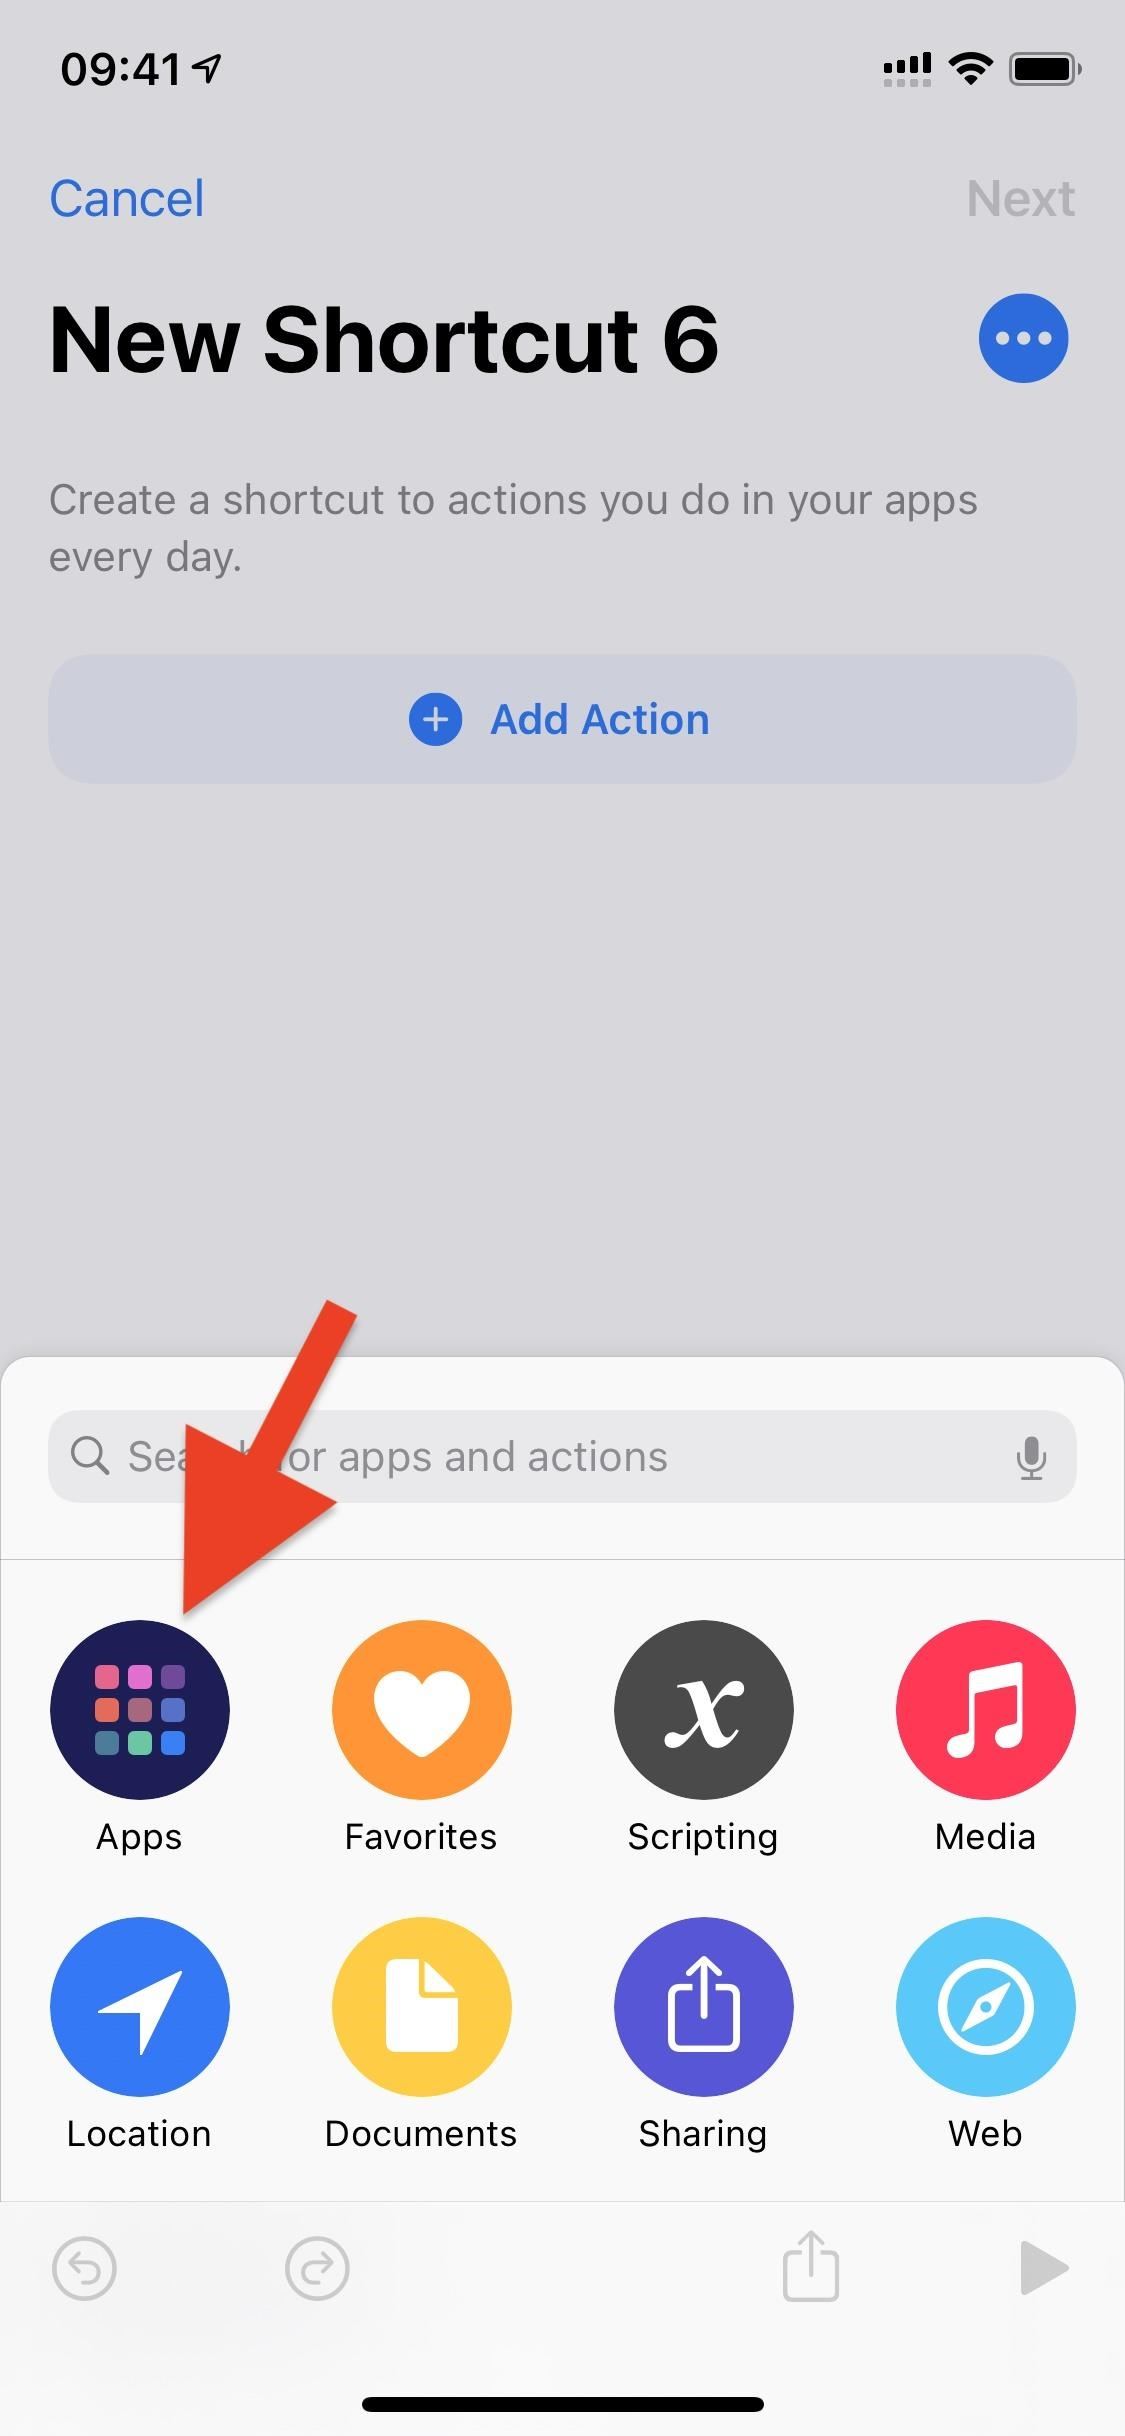 How to Quickly Open Your Favorite Apps Just by Tapping the Back of Your iPhone